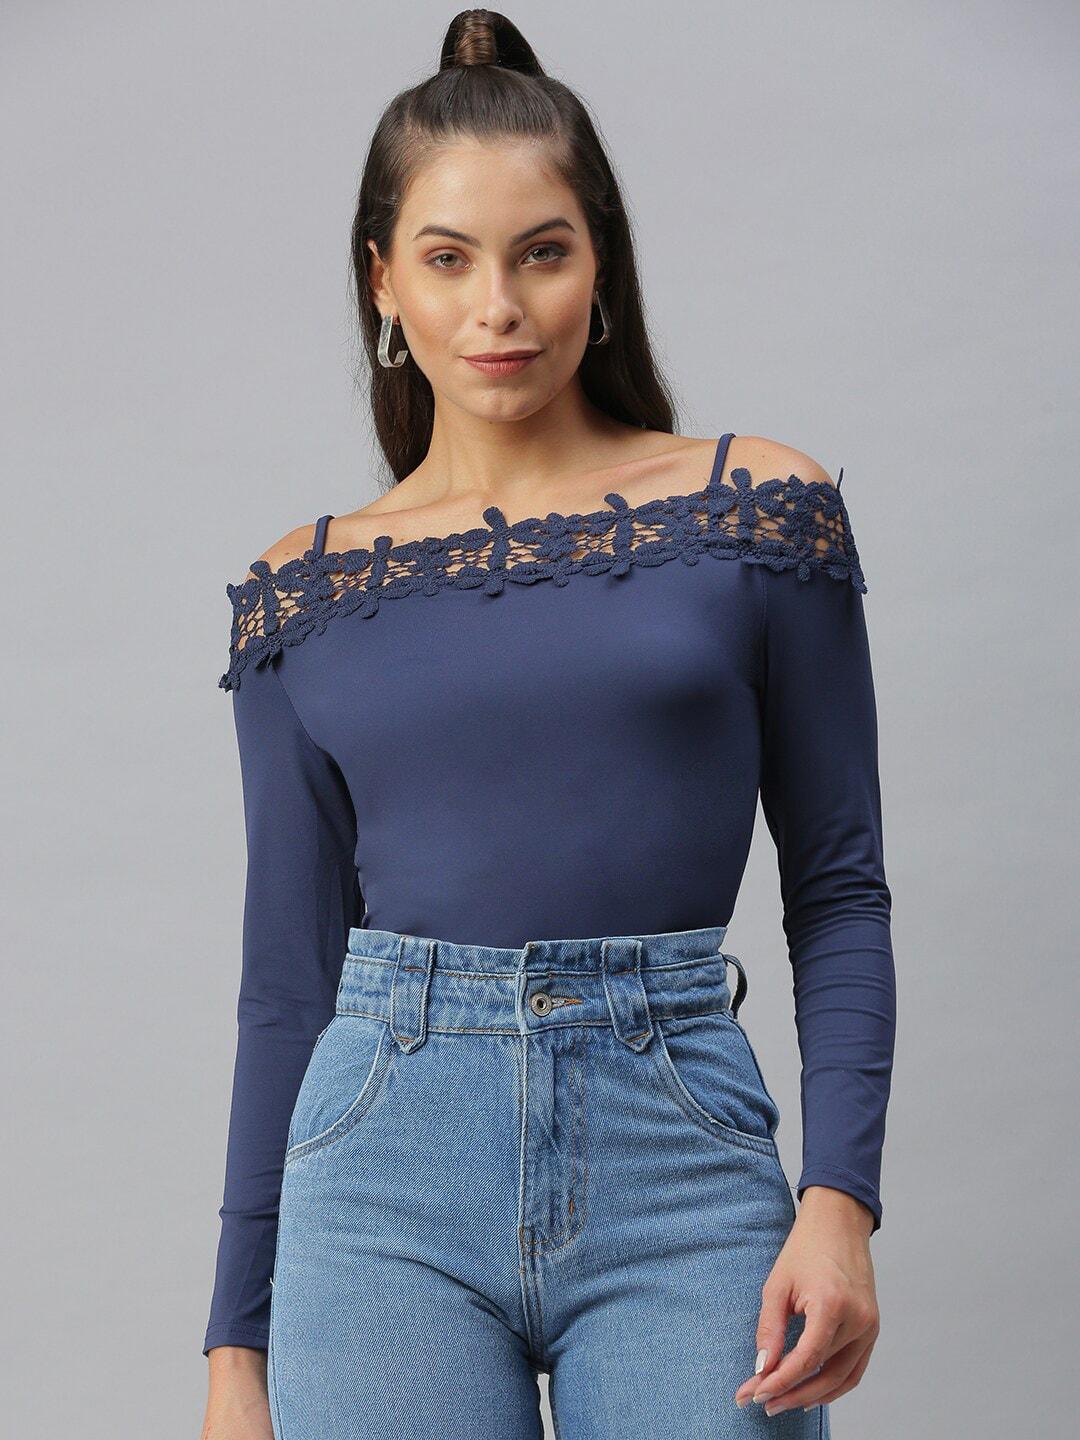 showoff-shoulder-straps-lace-up-fitted-top